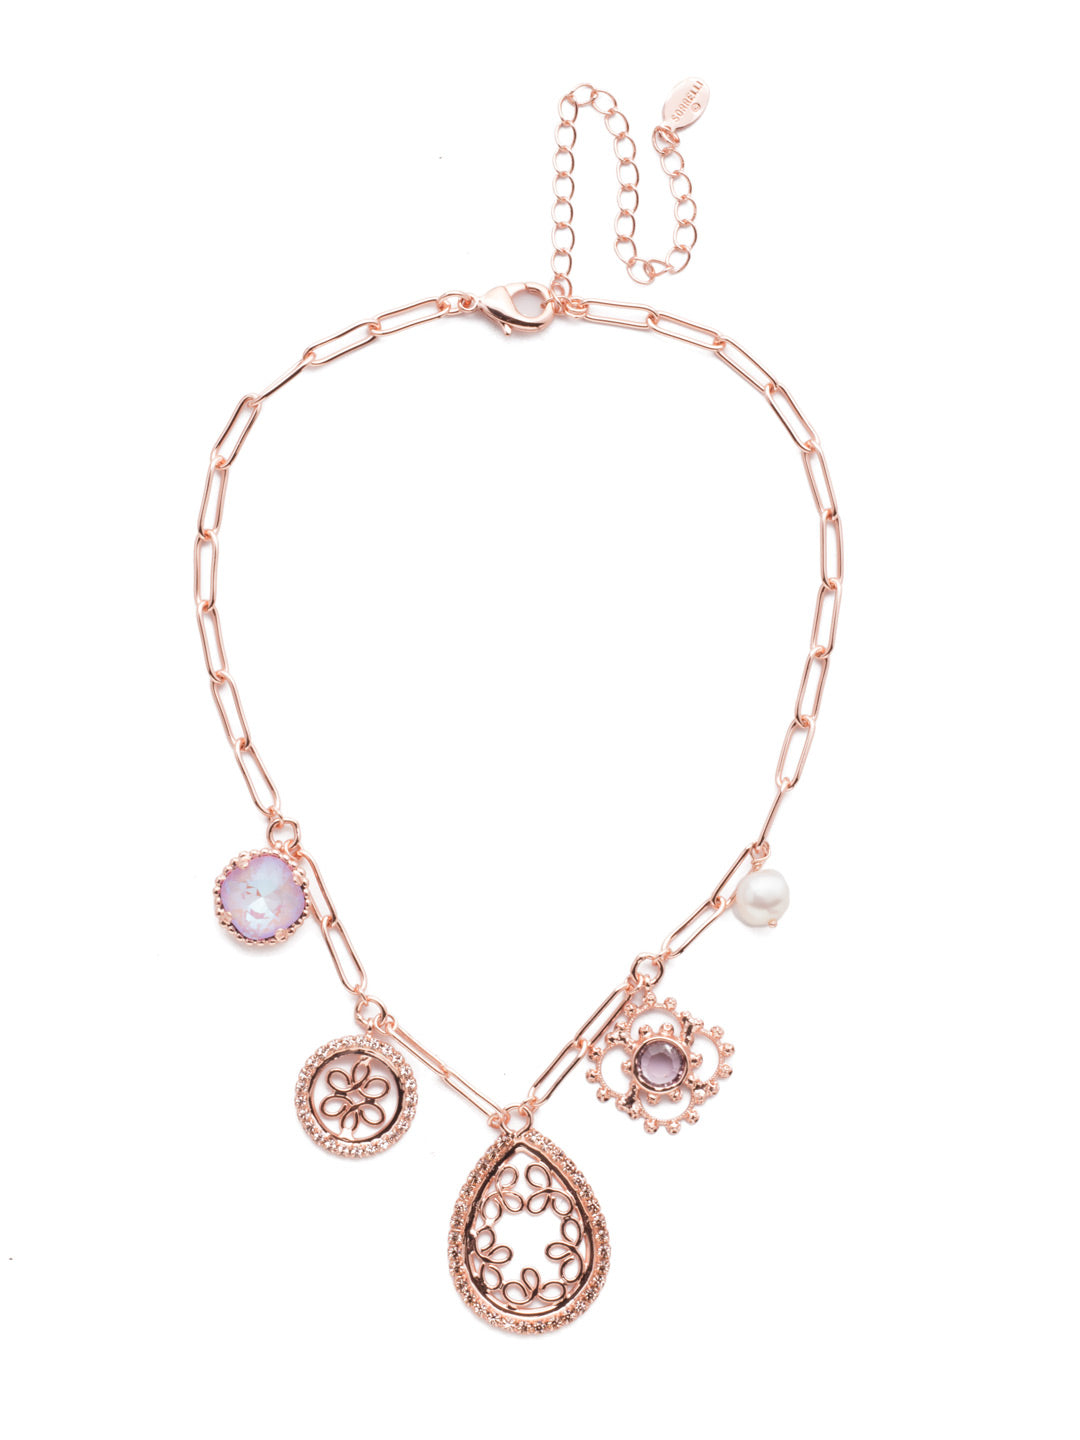 Hudson Statement Necklace - NES4RGLVP - <p>Our Hudson Statement Necklace has a charm bracelet feel. Five standout pieces link to an airy metal chain and feature hand-soldered metalwork, sparkling crystals, a pretty pearl and so much more. From Sorrelli's Lavender Peach collection in our Rose Gold-tone finish.</p>